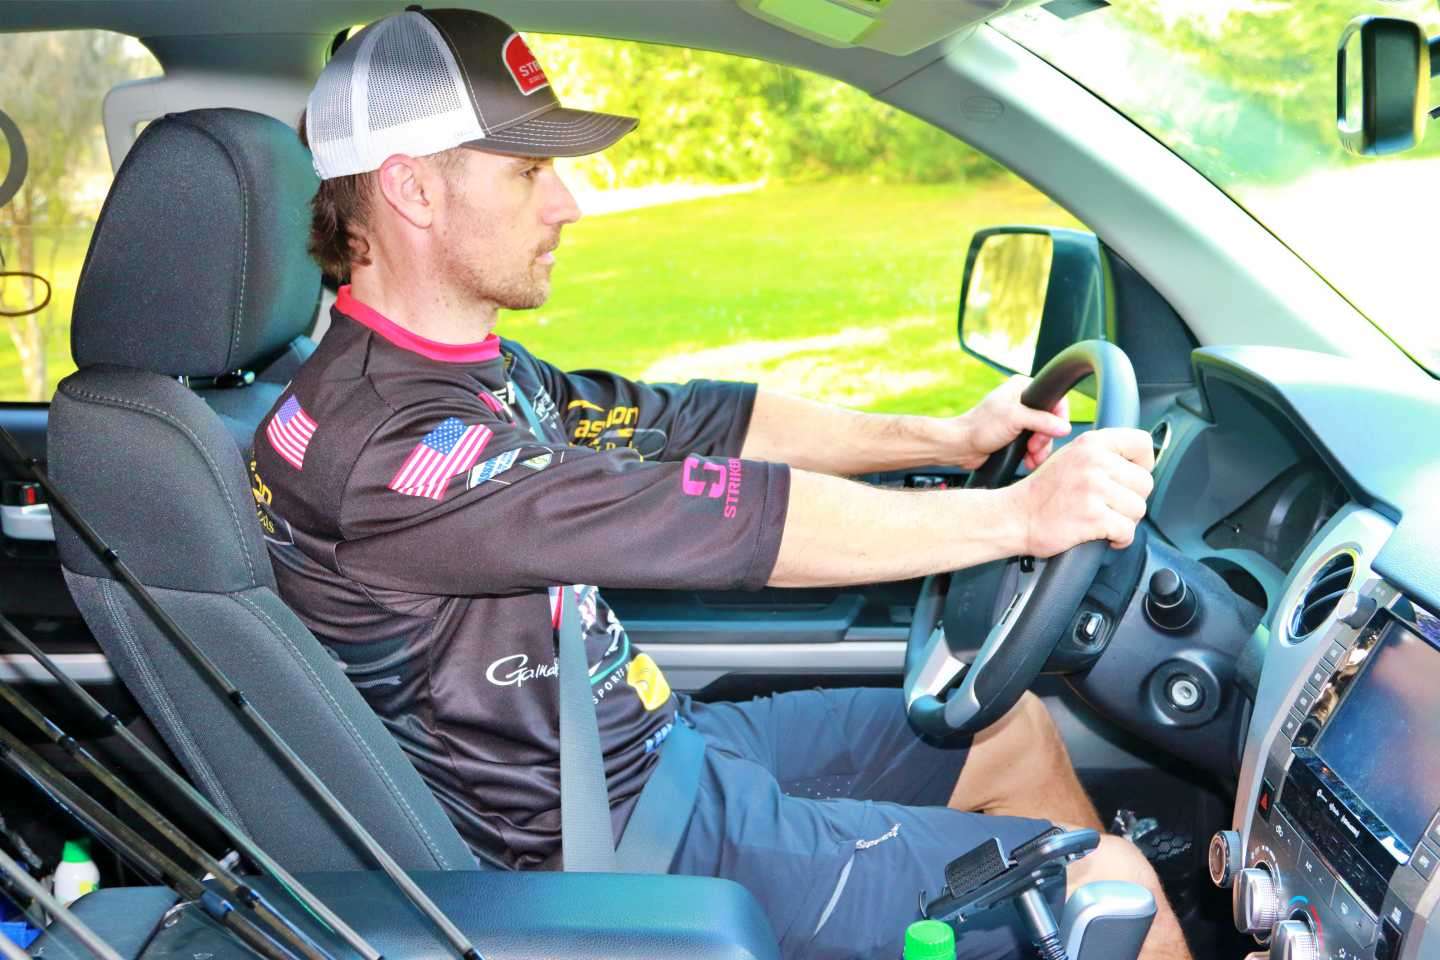 <b>Maintaining good posture.</b> Considering the amount of time Crews spends on the road, maintaining good posture behind the wheel has become one of his most diligent efforts. Rather than leaning to one side and slowly straining his lower back, Crews keeps himself perfectly centered.